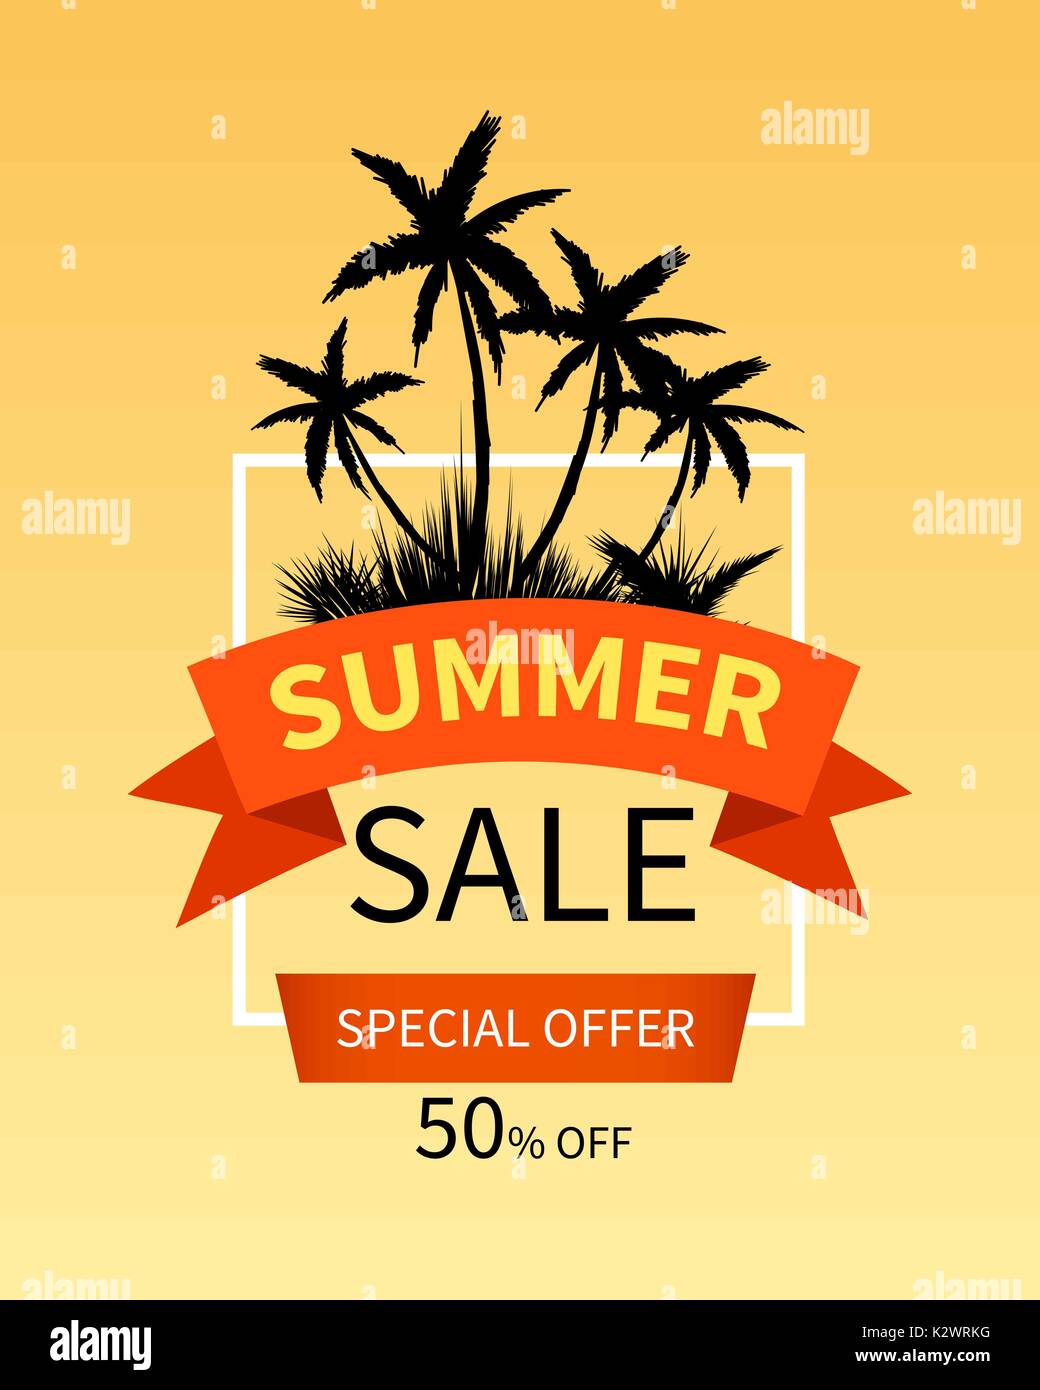 Summer sale banner design with palm trees. Vector illustration Stock Vector